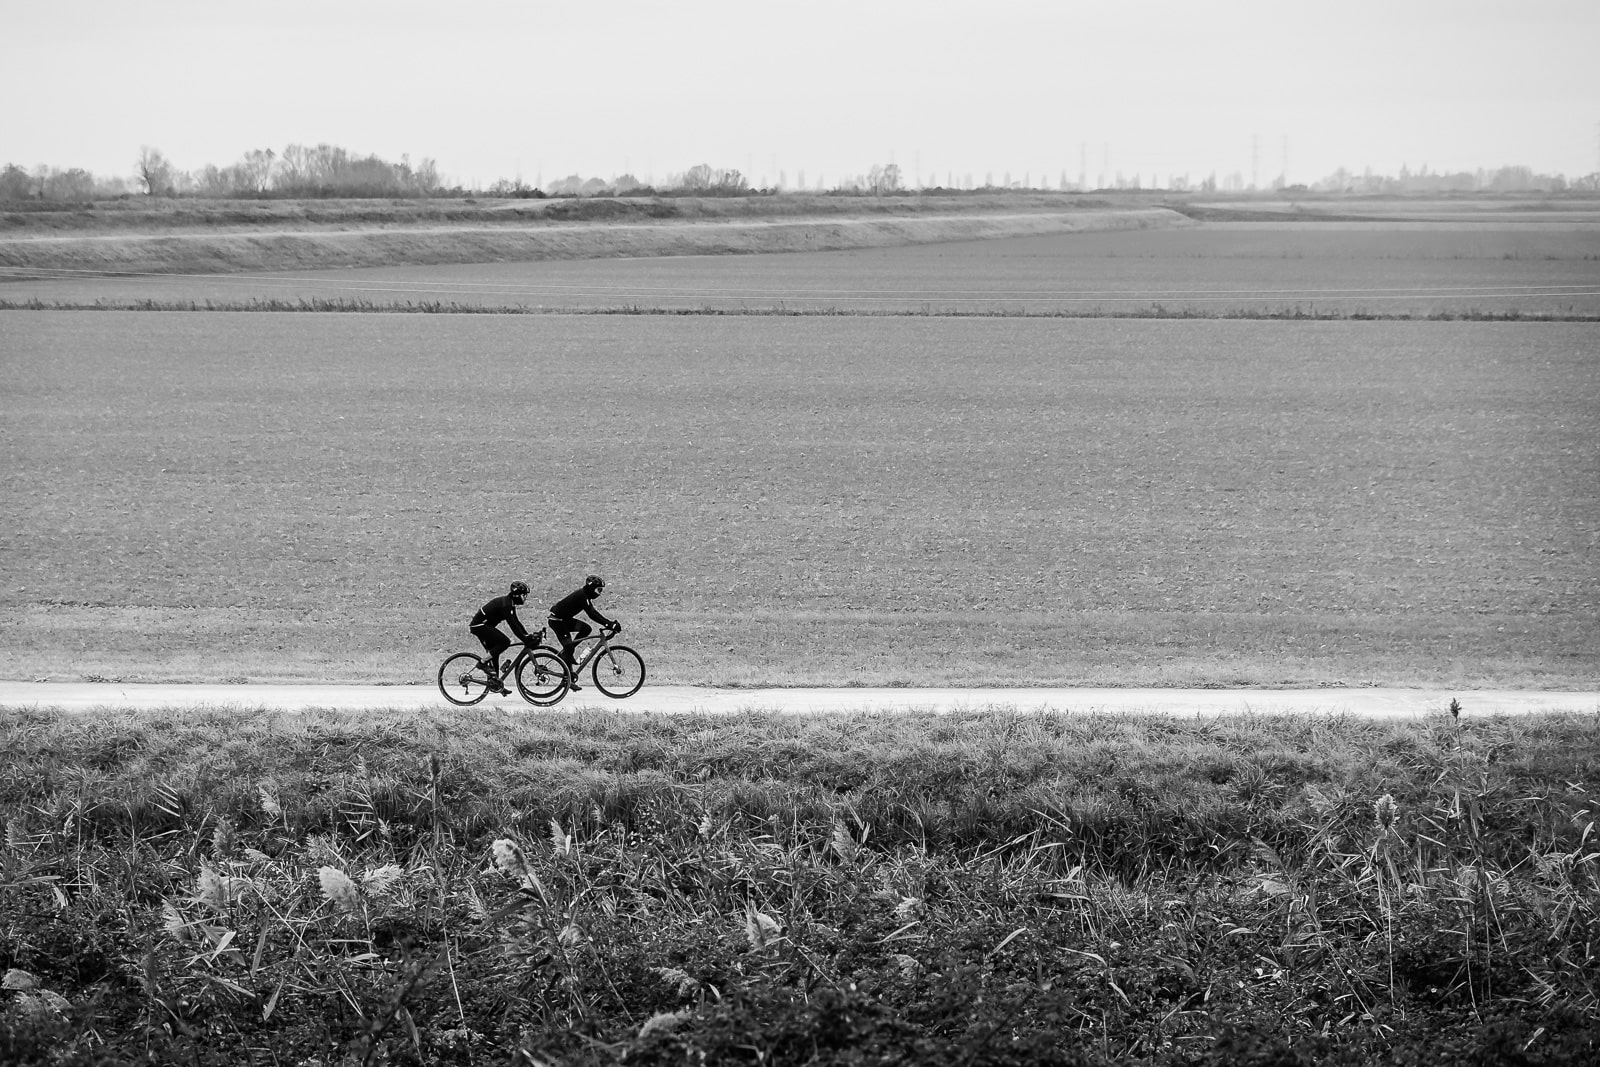 The Rouleur and the Po Delta